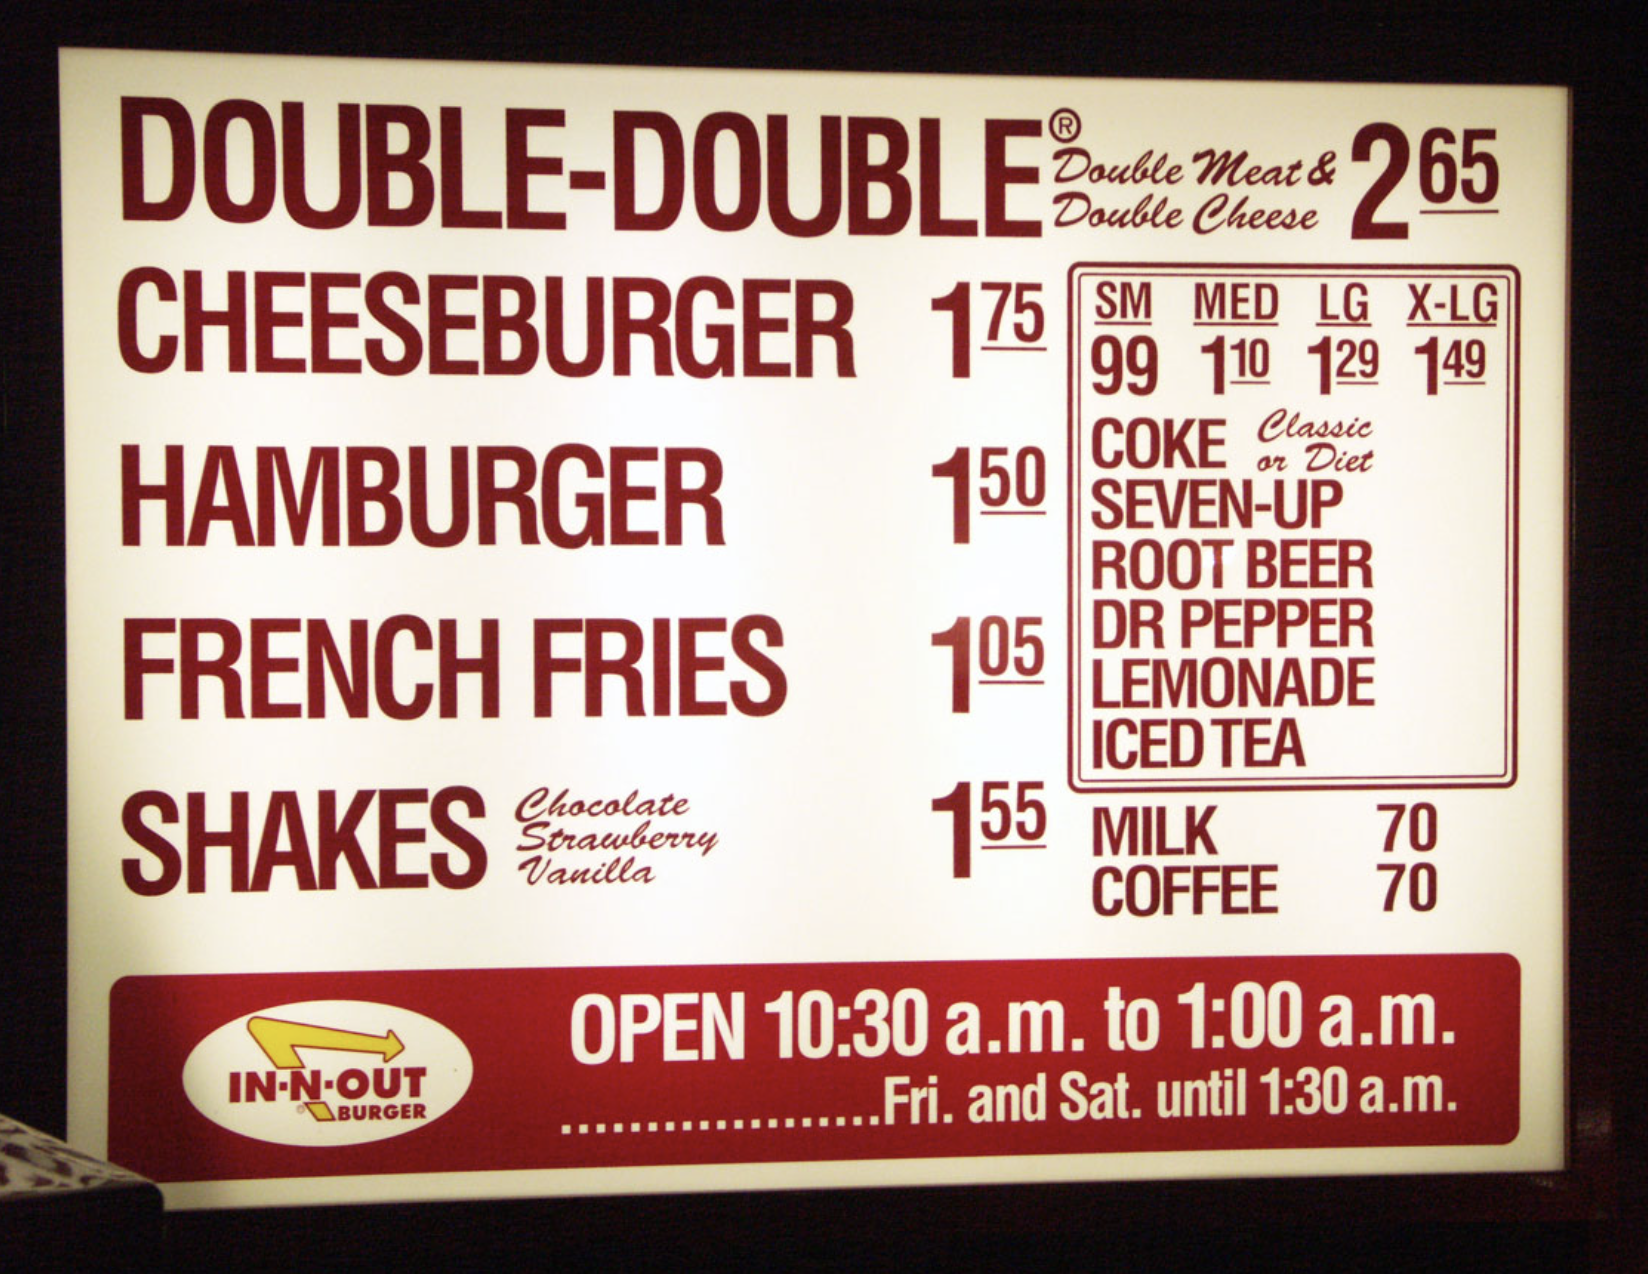 display device - Double Meat & Double Cheese 265 DoubleDouble Cheeseburger 175 99 110 129 149 Hamburger French Fries Shakes Chocolate Strawberry Vanilla InNOut Burger Sm Med Lg XLg Classic Coke or Diet 150 SevenUp Root Beer Dr Pepper 105 Lemonade Iced Tea